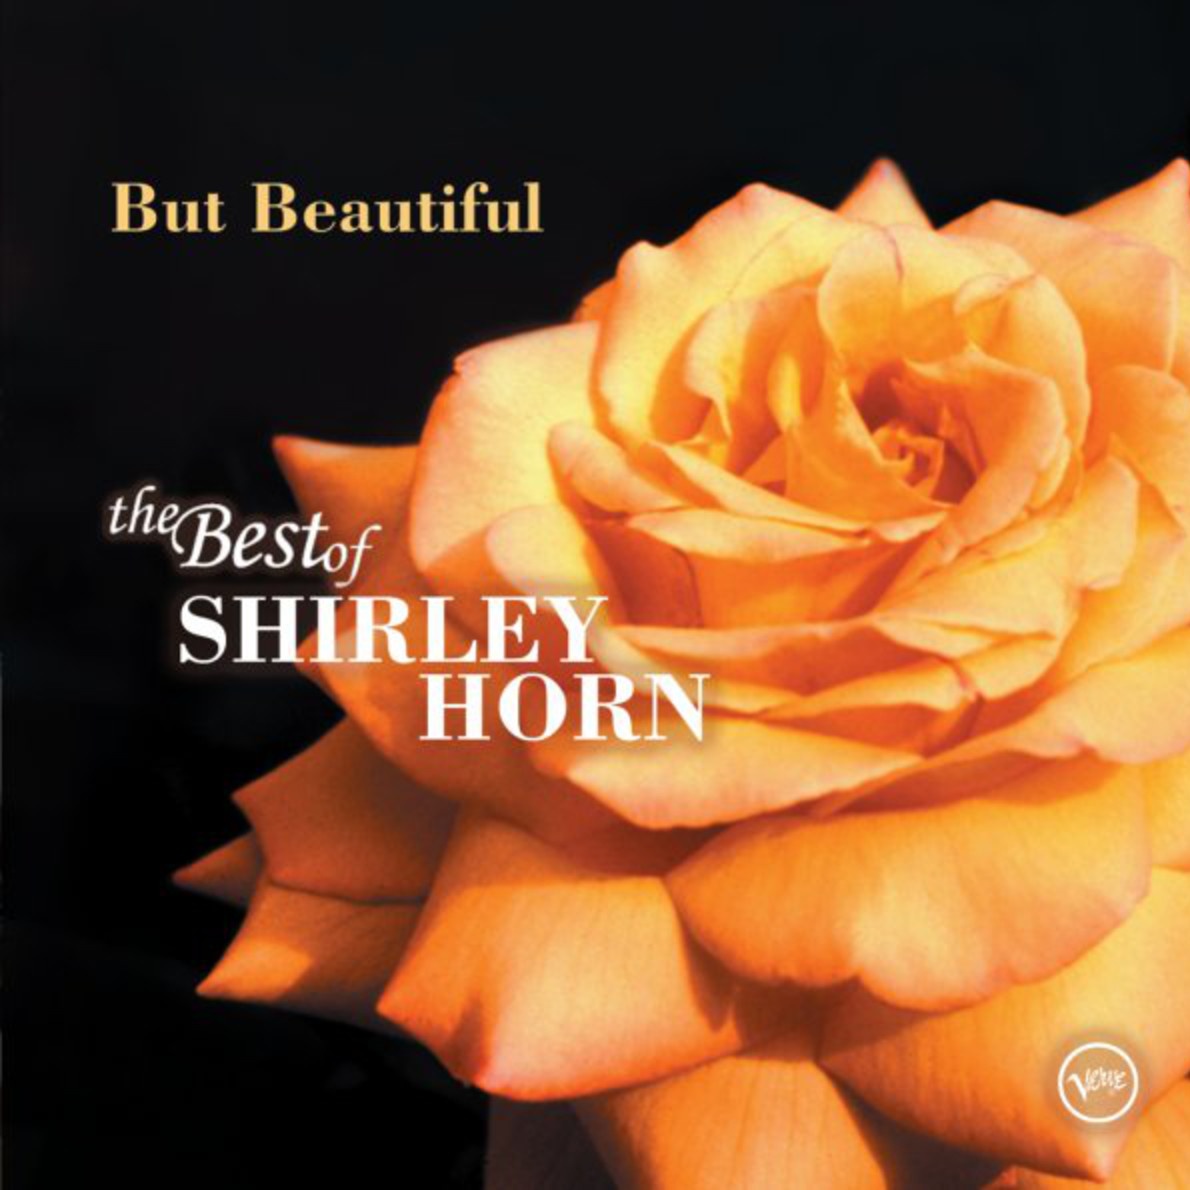 But Beautiful: The Best Of Shirley Horn